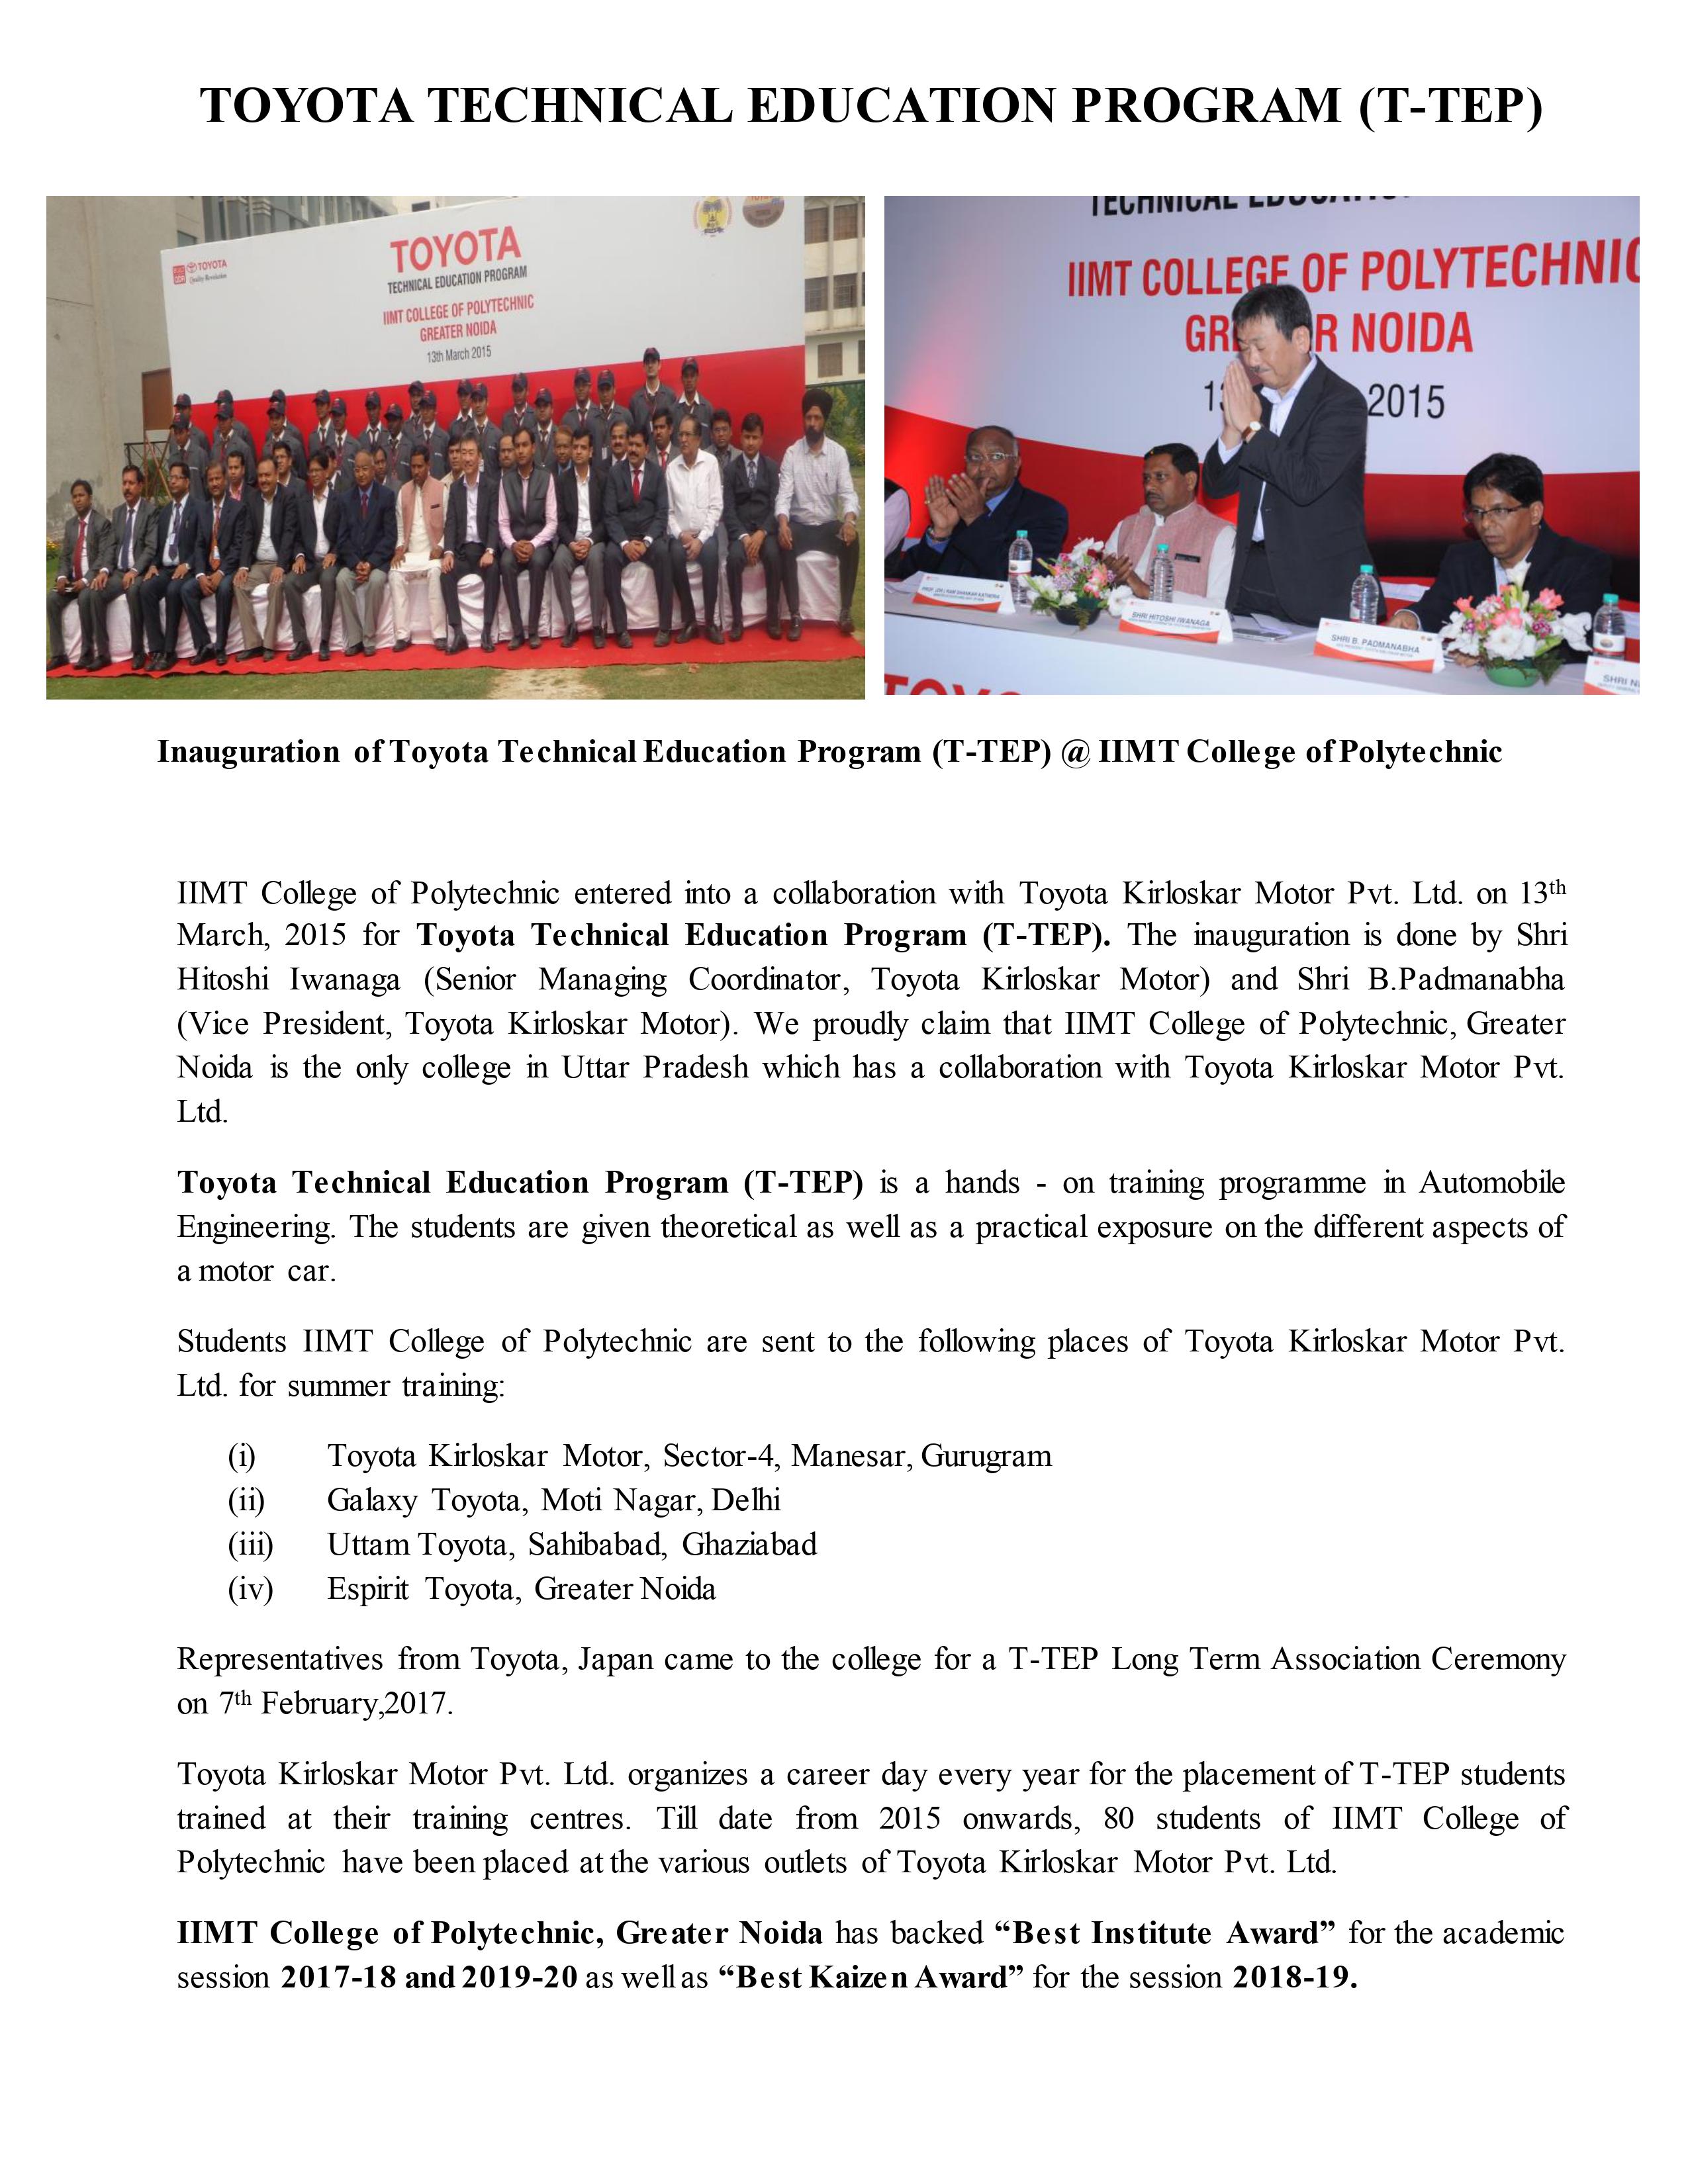 MoU Between IIMT and TOYOTA  for Technical Education Program    (T-TEP)